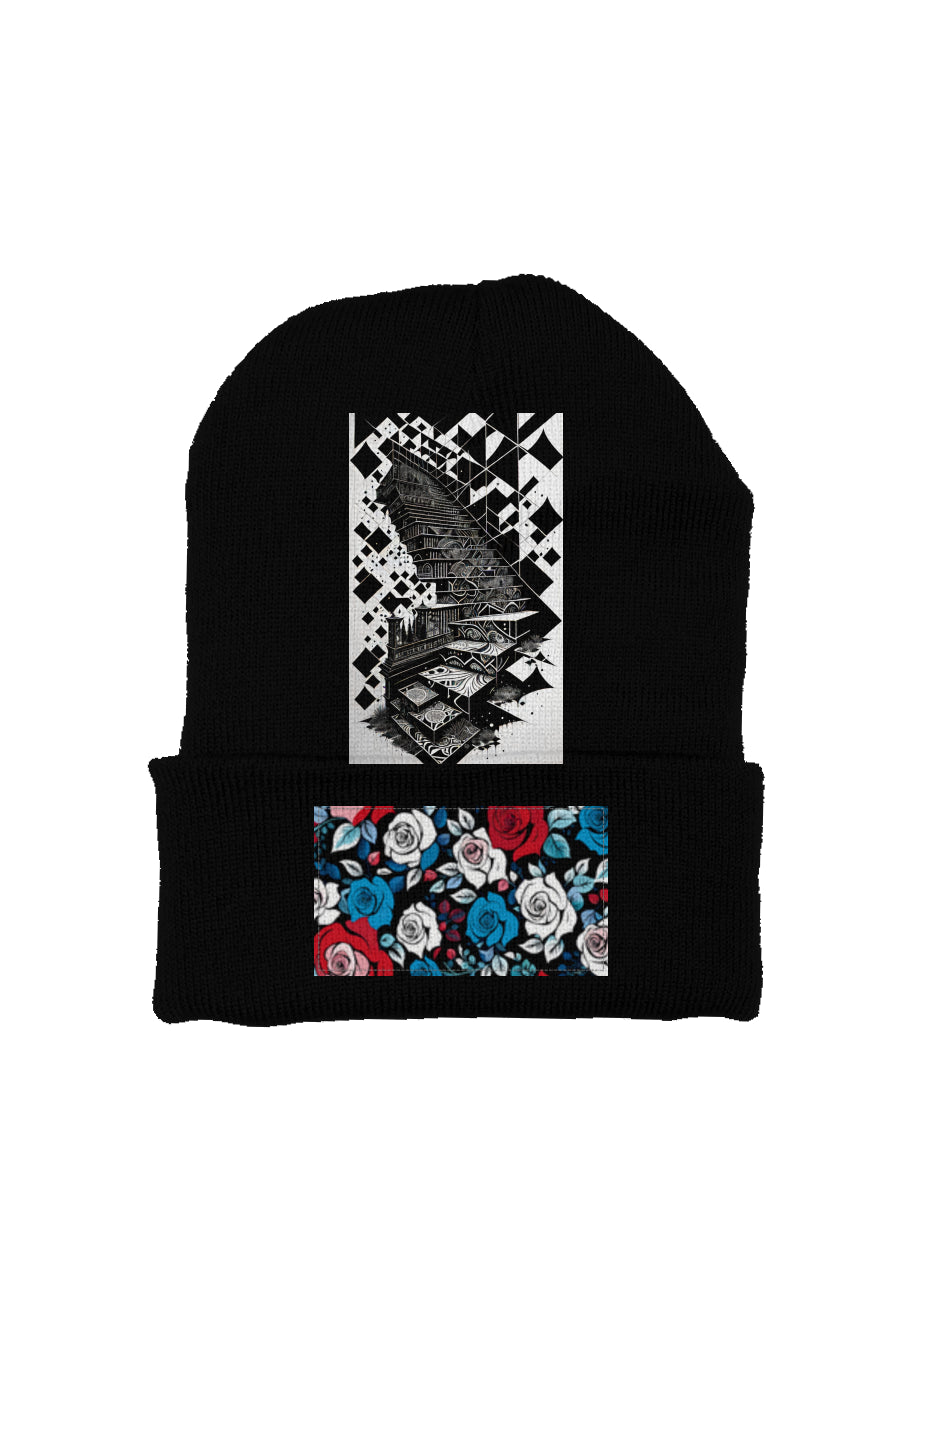 Graphic Beanie - Storm The Rose Castle